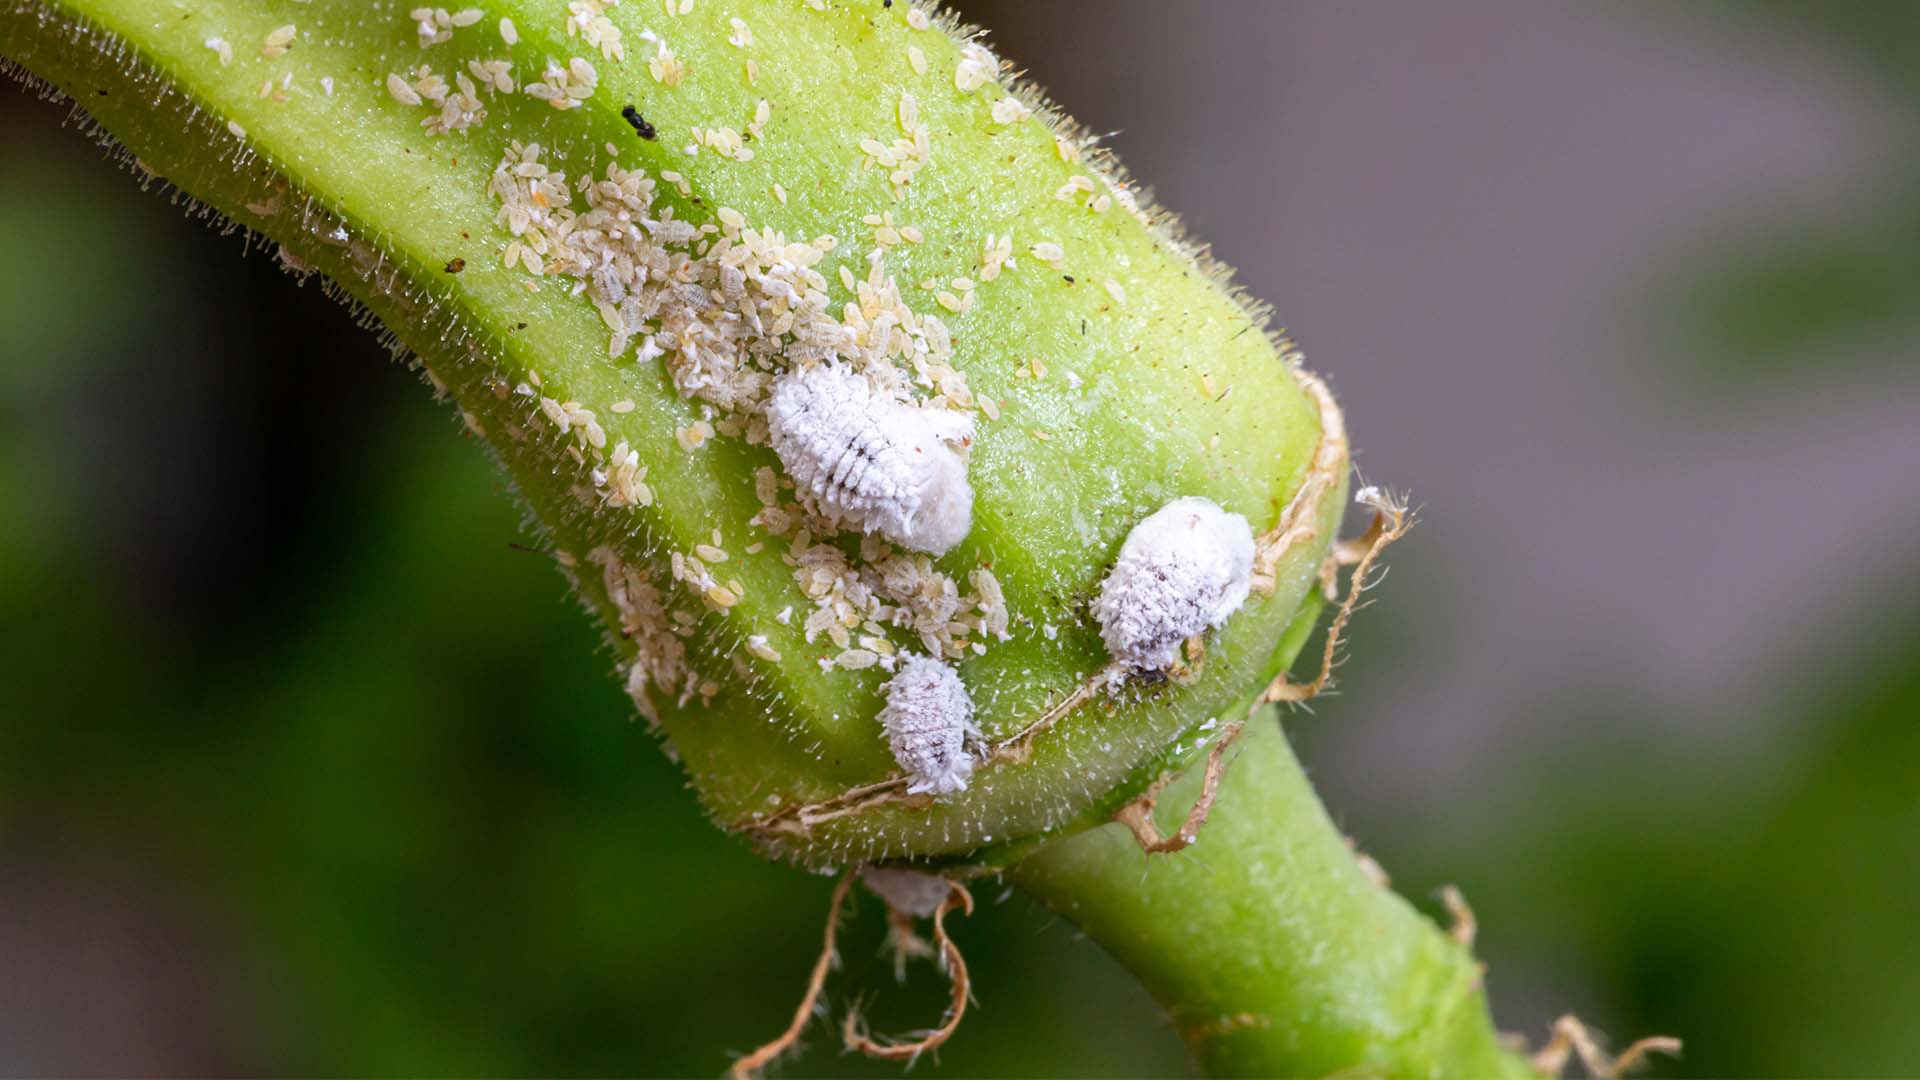 Close-up photo of pests. Mealybugs swarming an flower bud.